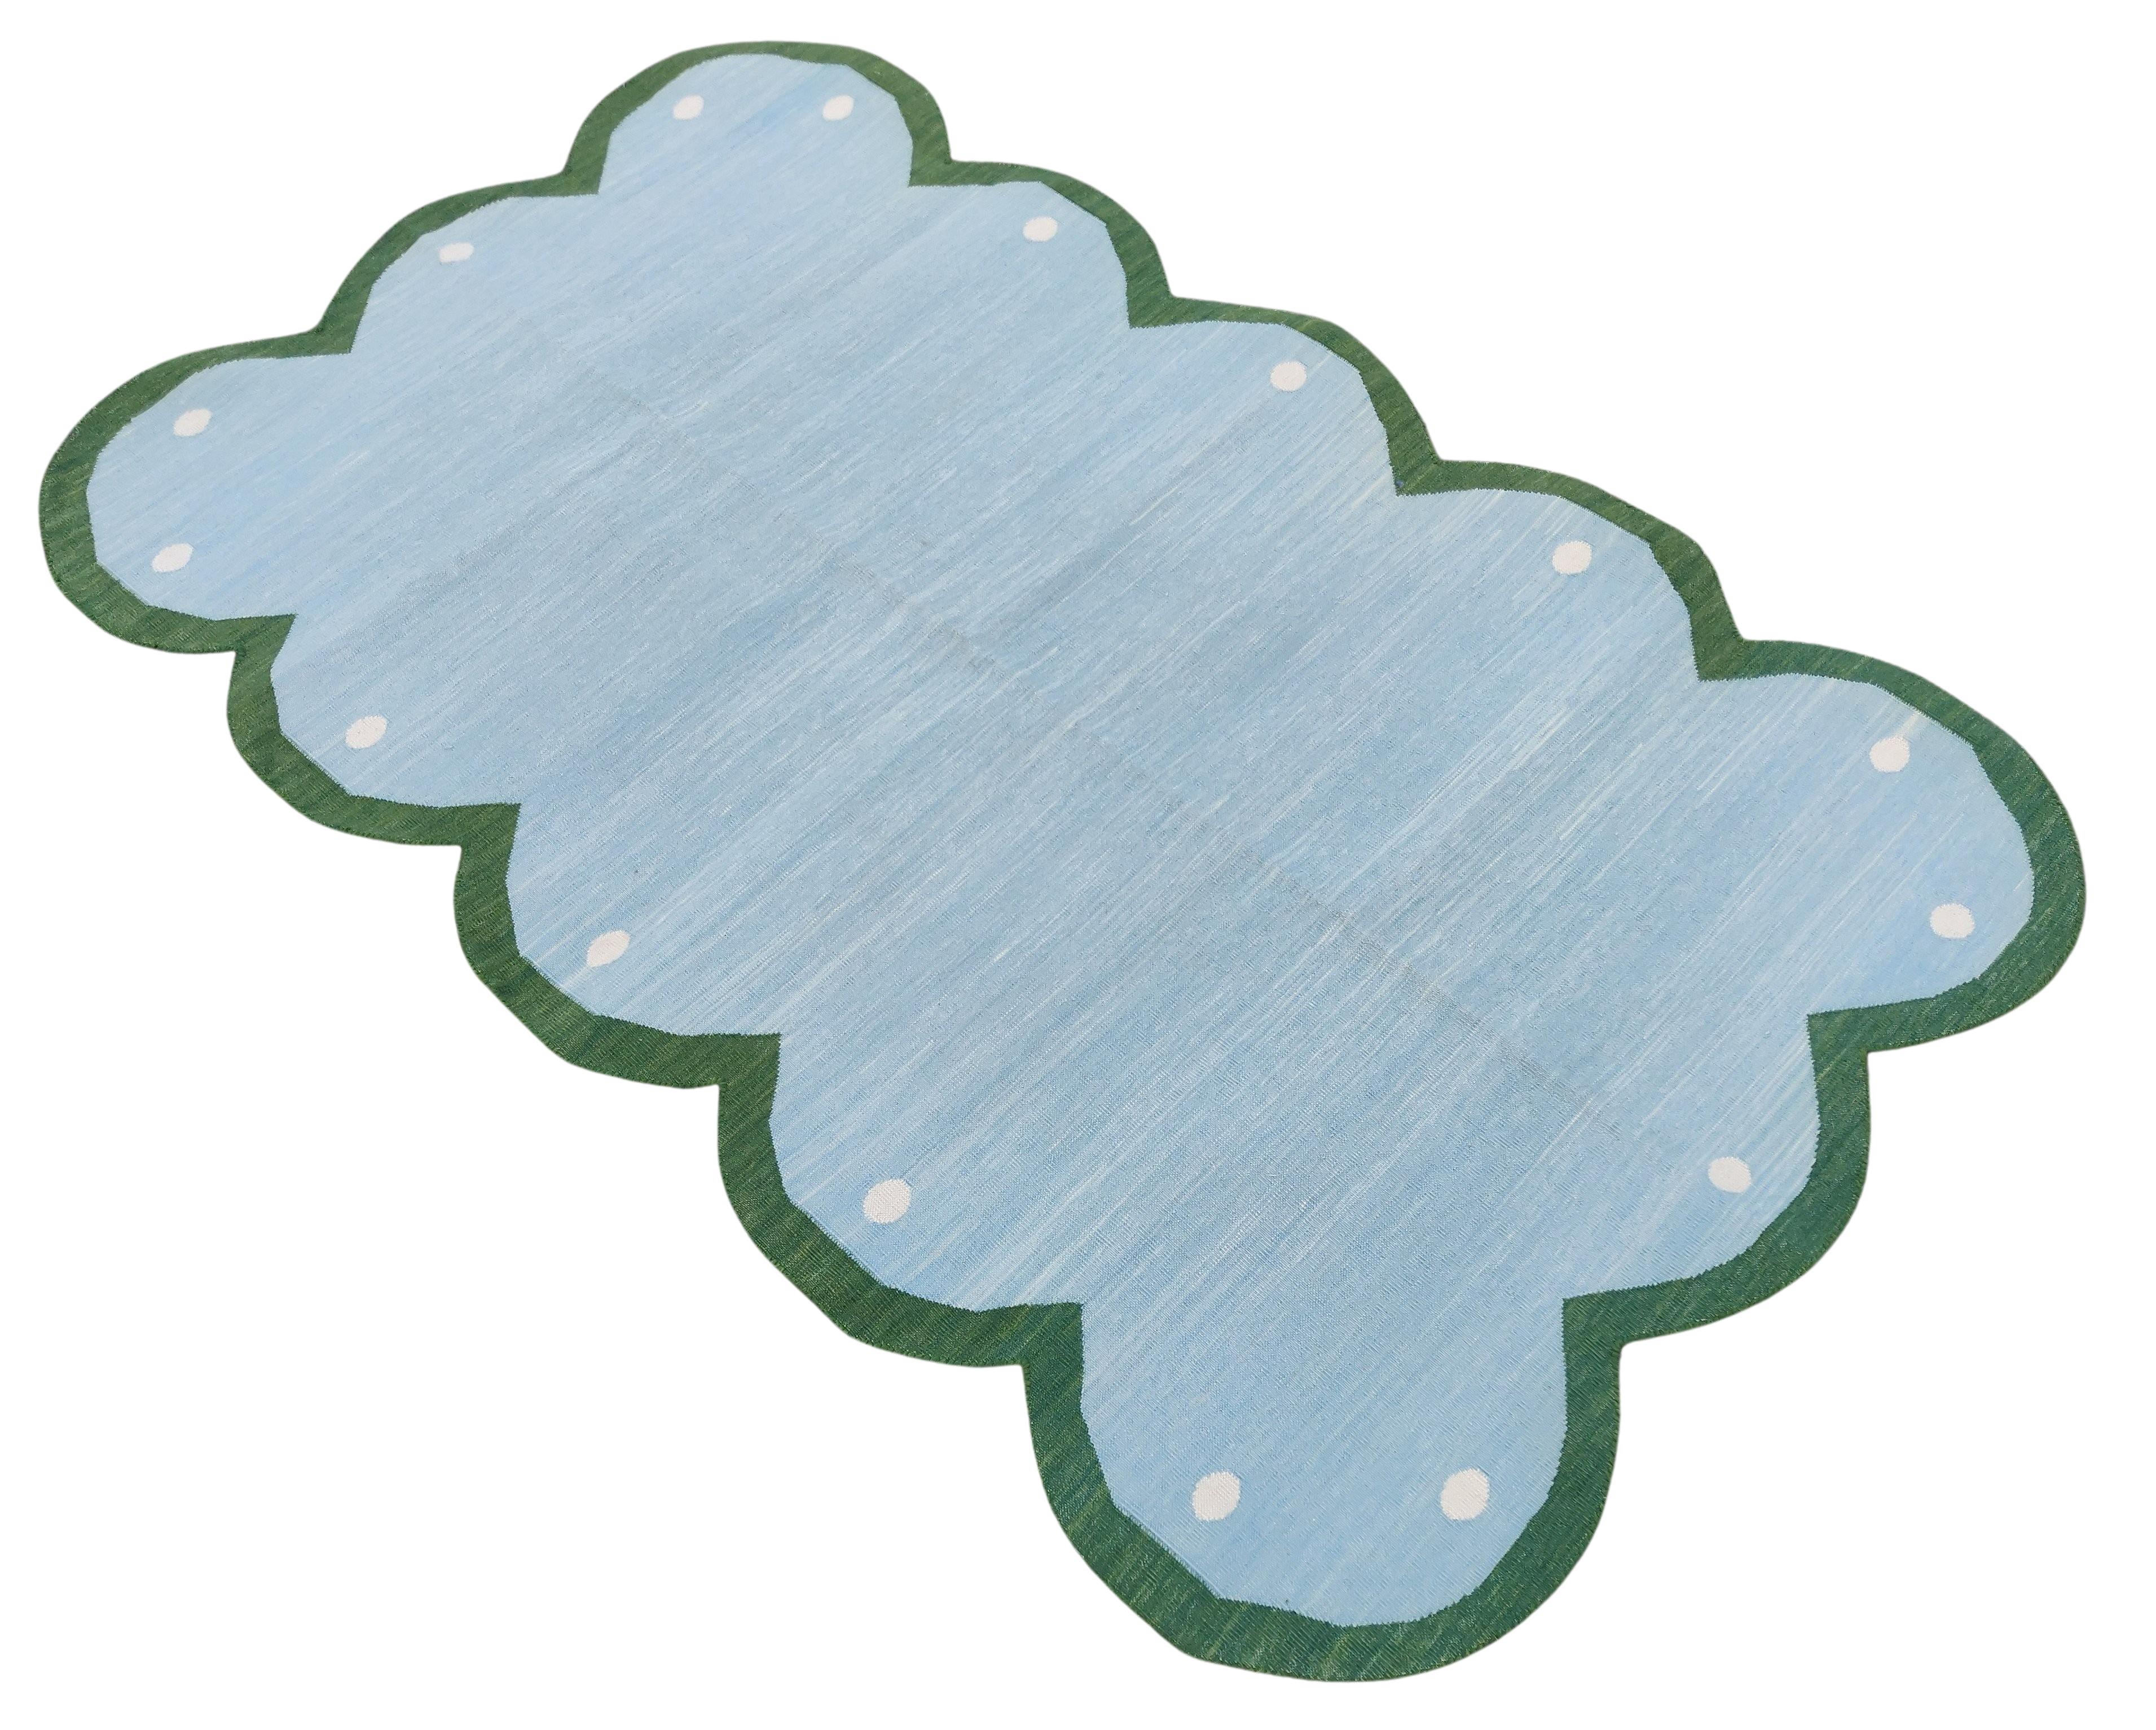 Cotton Vegetable Dyed Sky Blue & Forest Green Four Sided Scalloped Rug-8'x10' 
(Scallops runs on all 4 Sides)
These special flat-weave dhurries are hand-woven with 15 ply 100% cotton yarn. Due to the special manufacturing techniques used to create